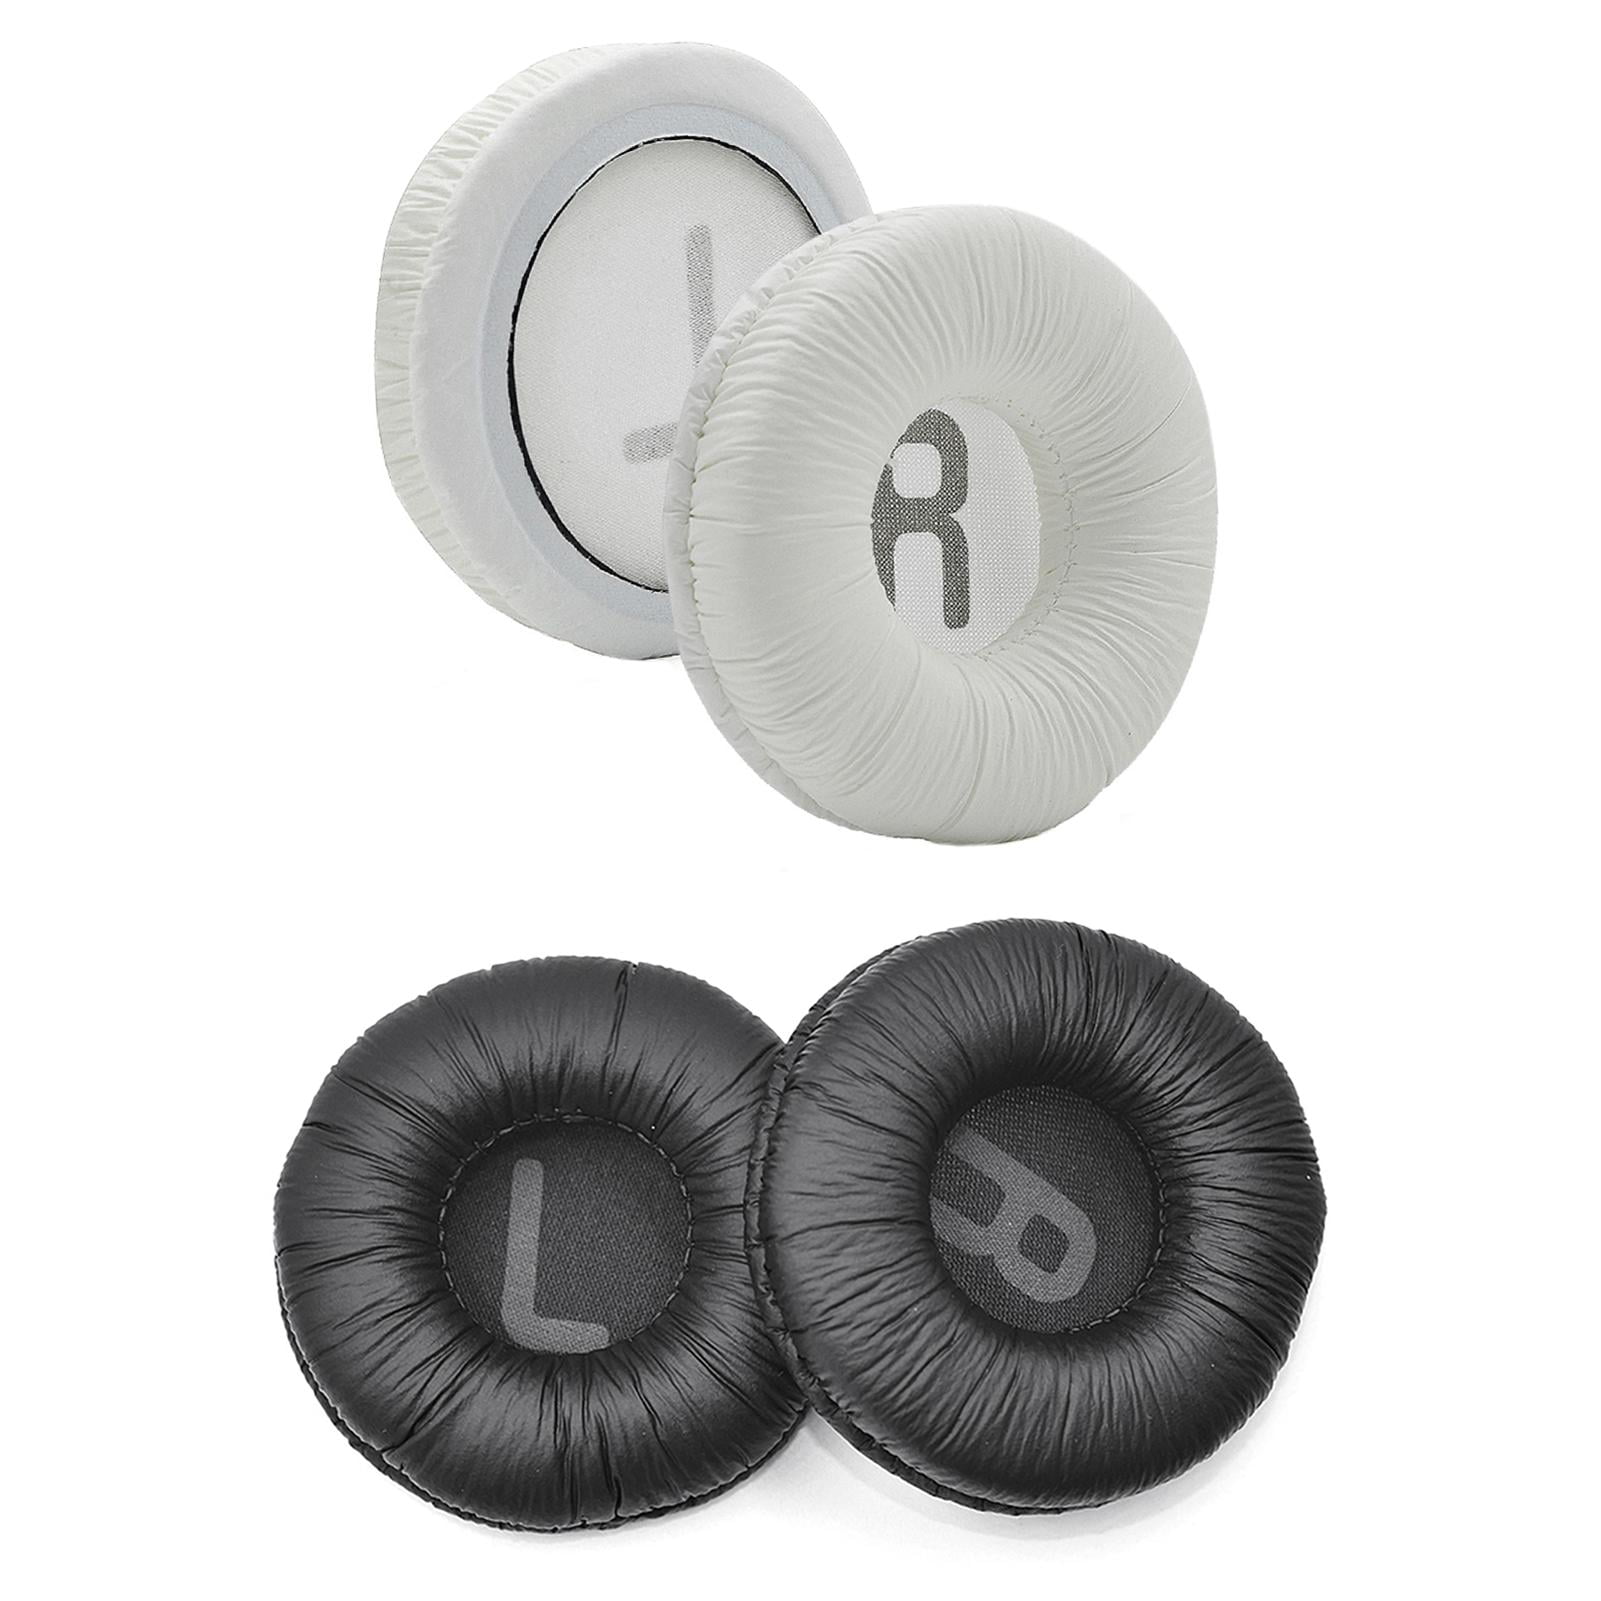 HD25 HD25 Replacement Ear Pads Thick PU Leather for Sennheiser 